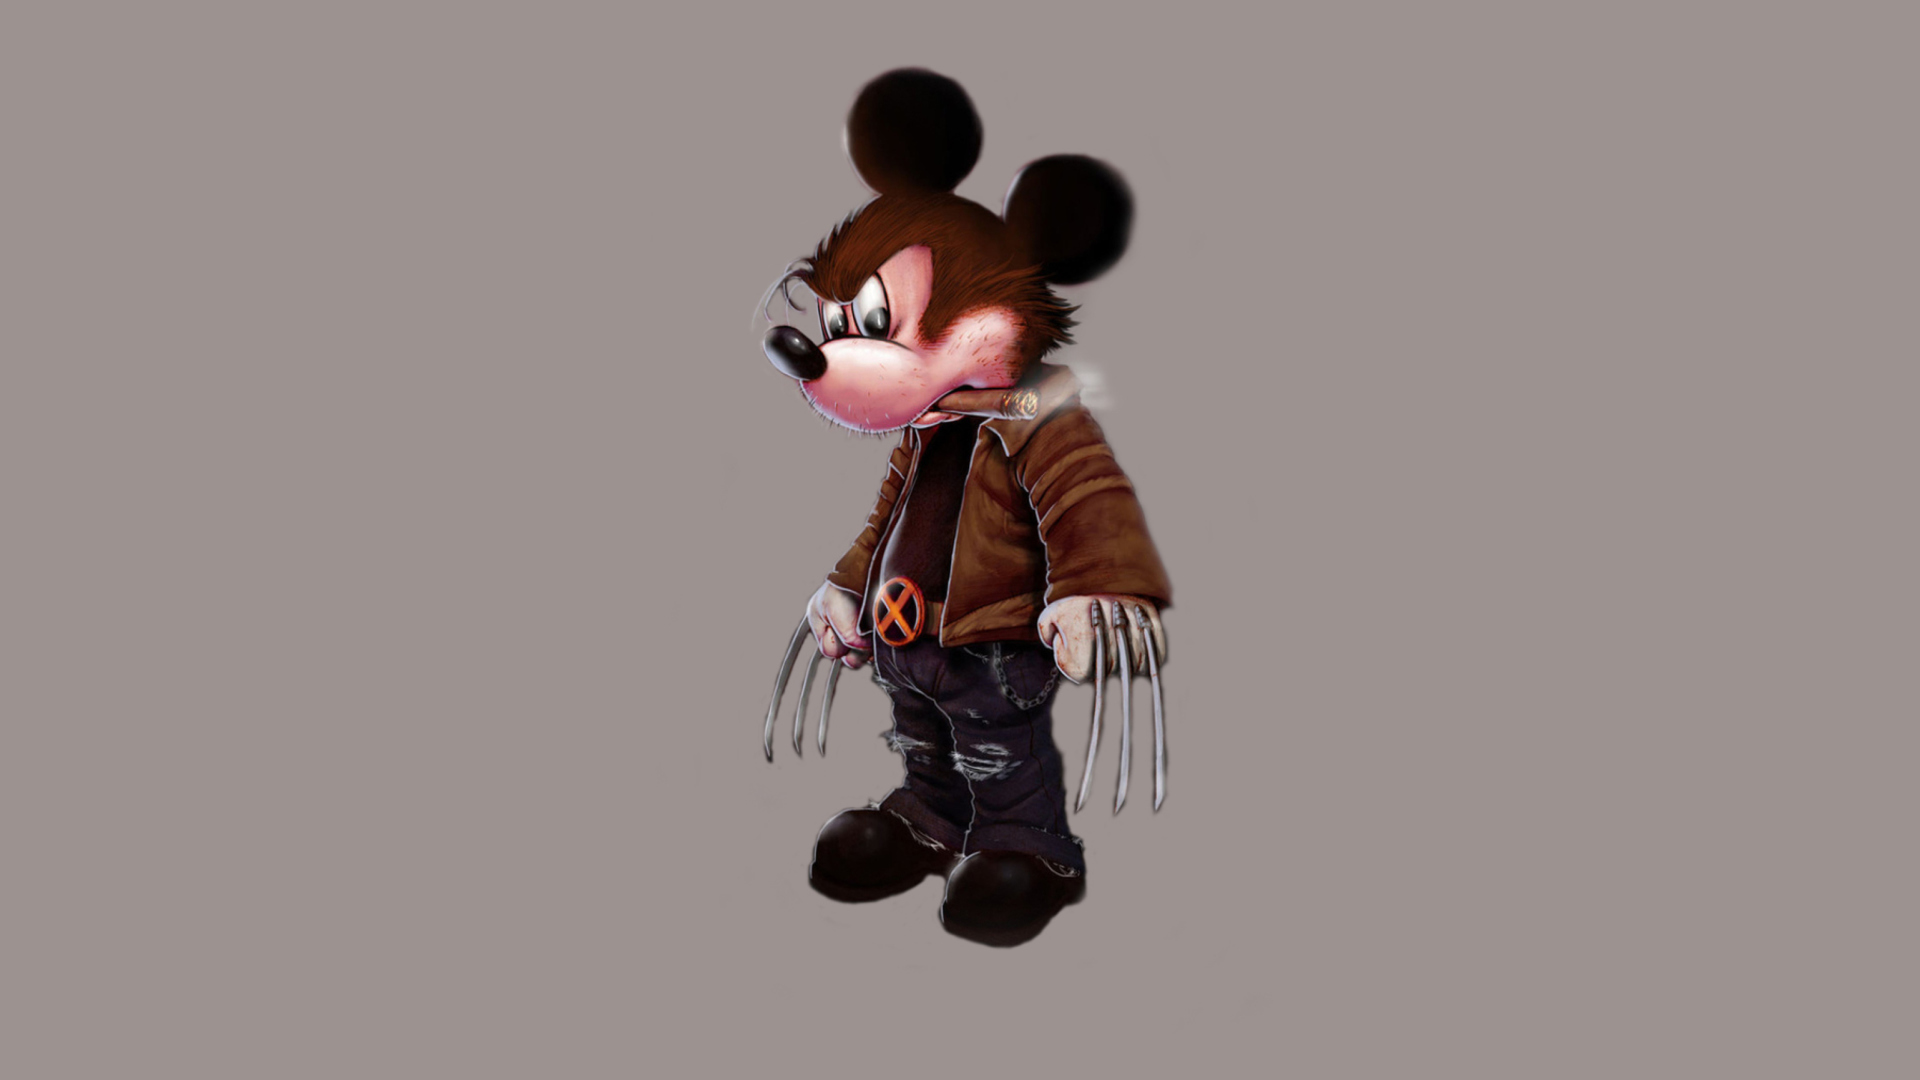 Mickey Wolverine Mouse screenshot #1 1920x1080